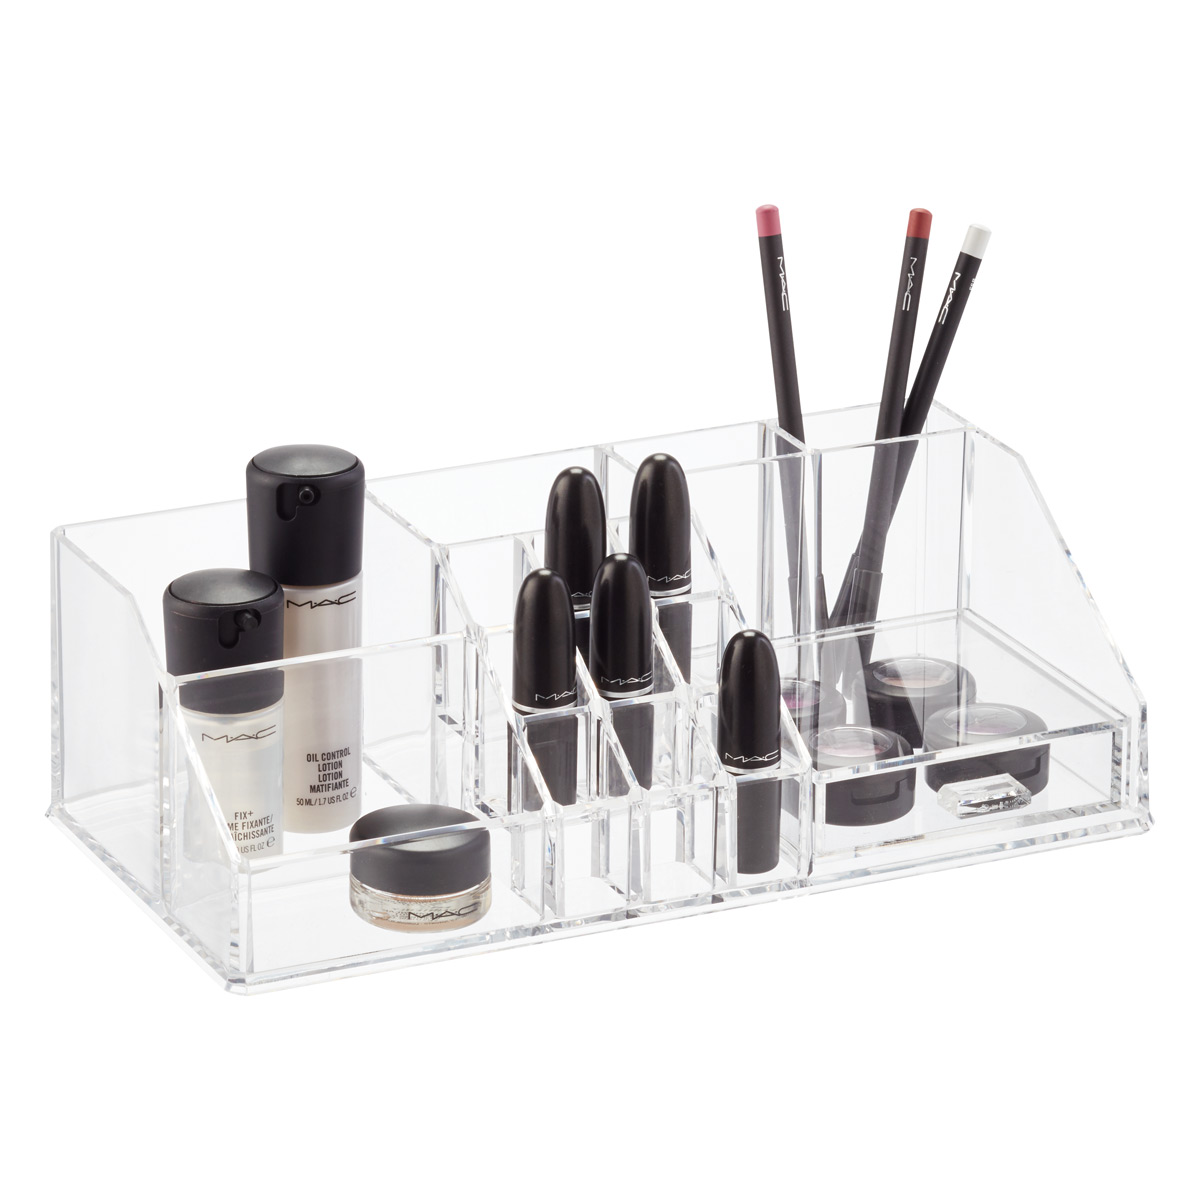 Acrylic Makeup Organizer Drawer | Container Store